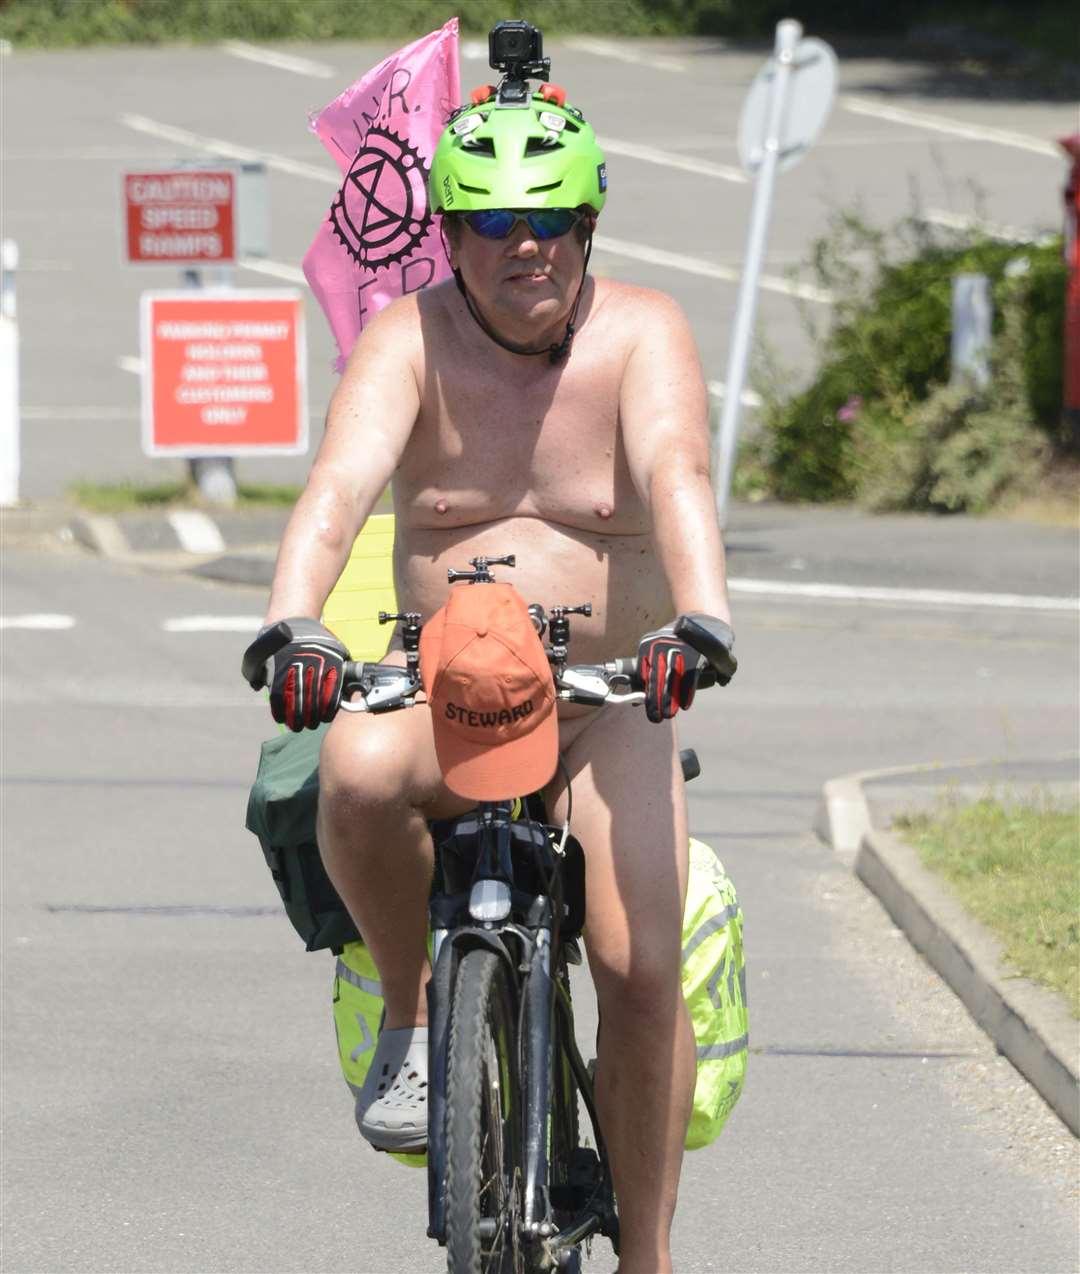 The ride took place on the hottest day of the year so far. Picture: Paul Amos